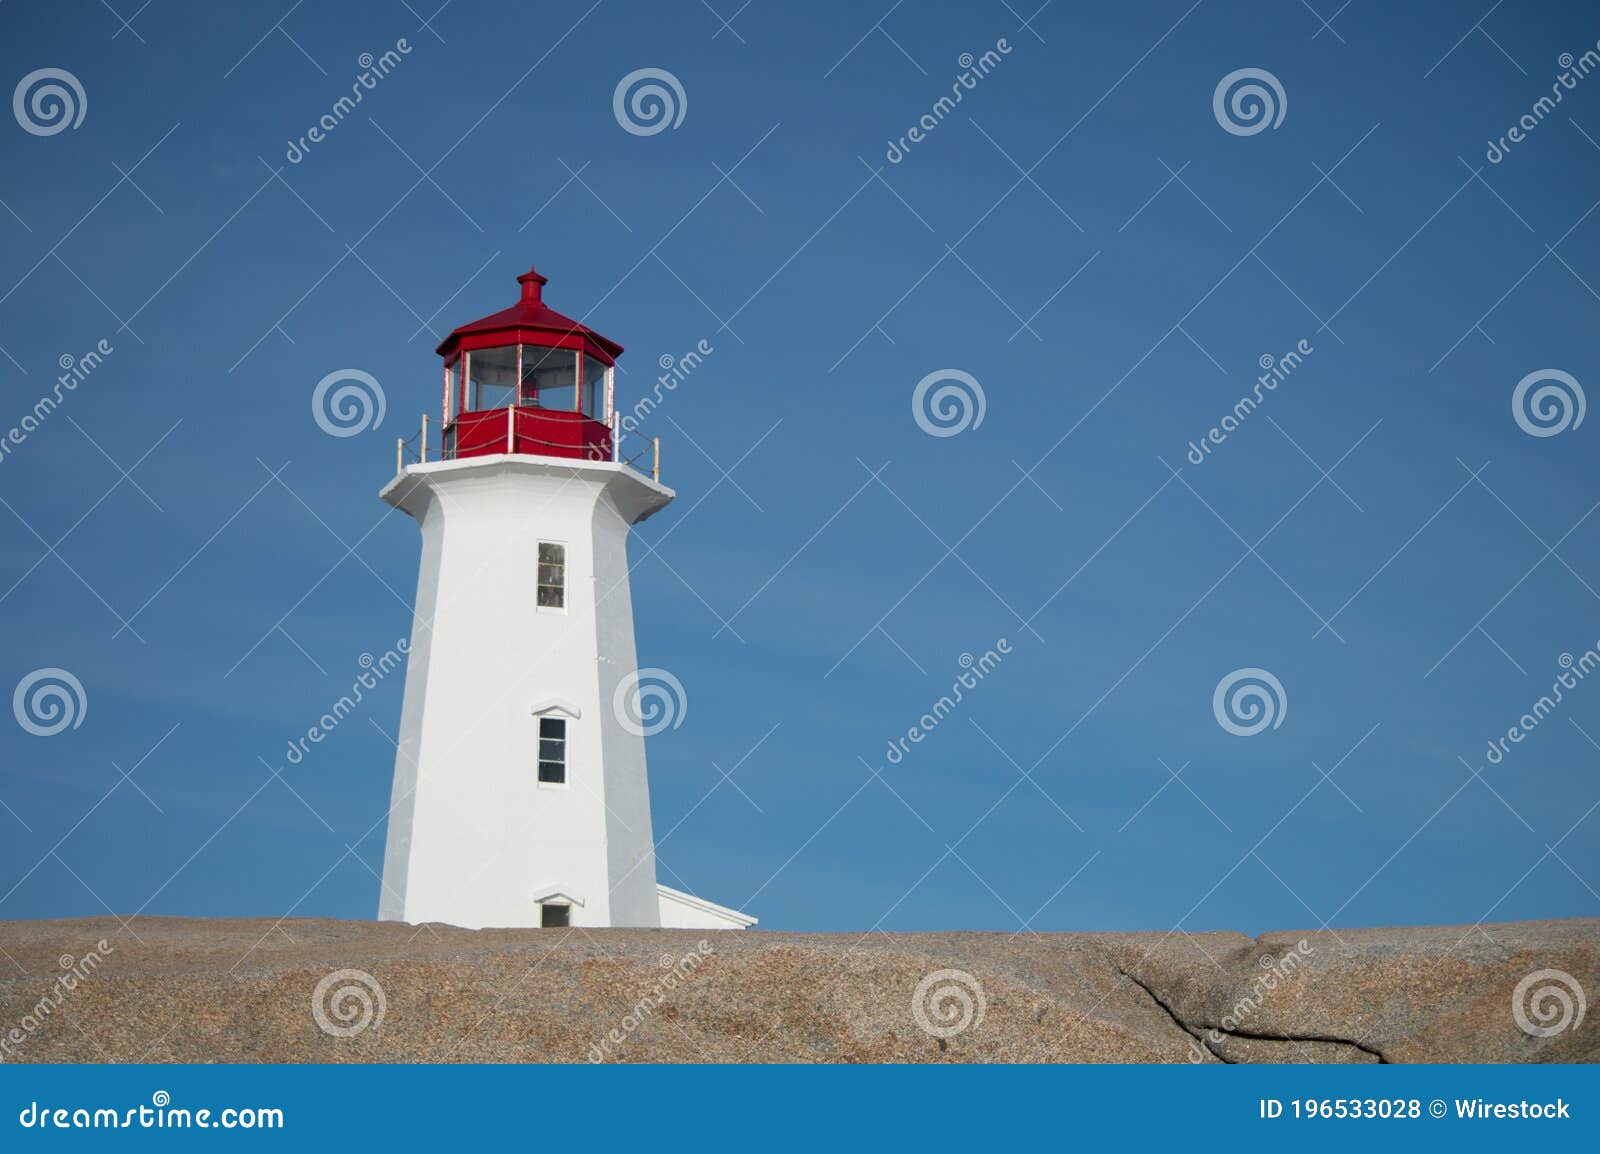 peggy?s cove lighthouse in halifax, canada